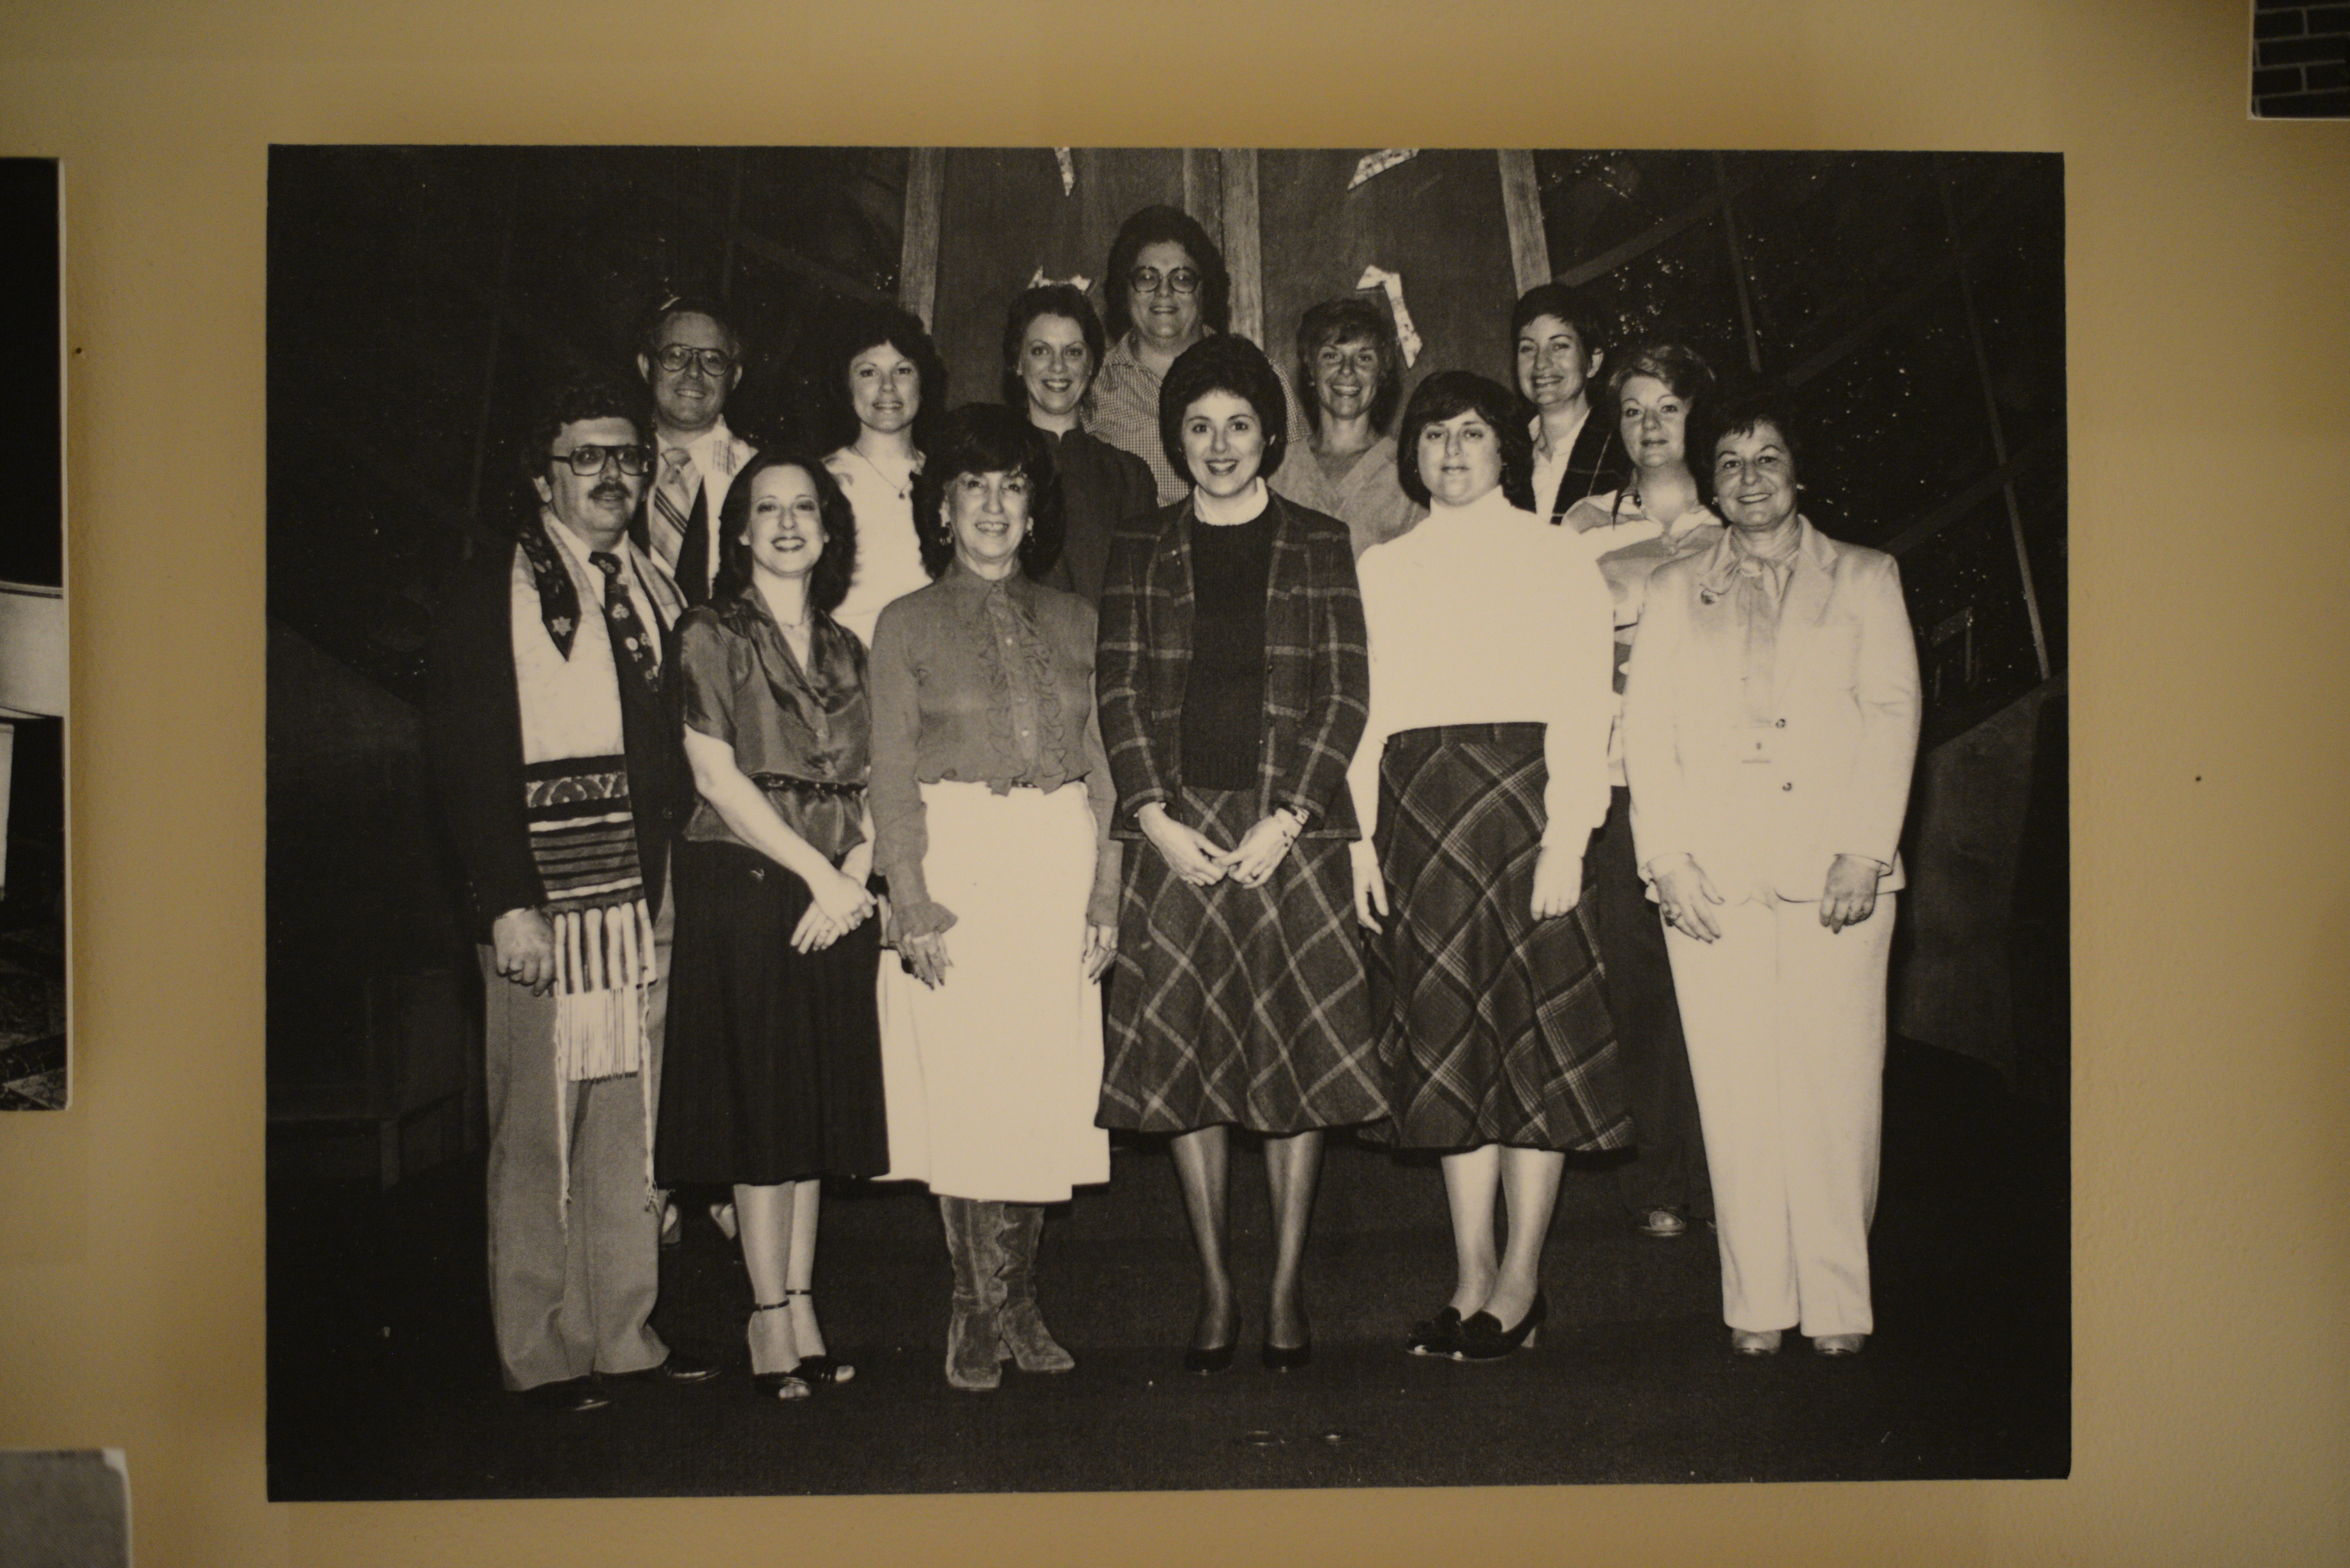 Photograph of the first adult B'nai Mitzvah group at Temple Beth Sholom